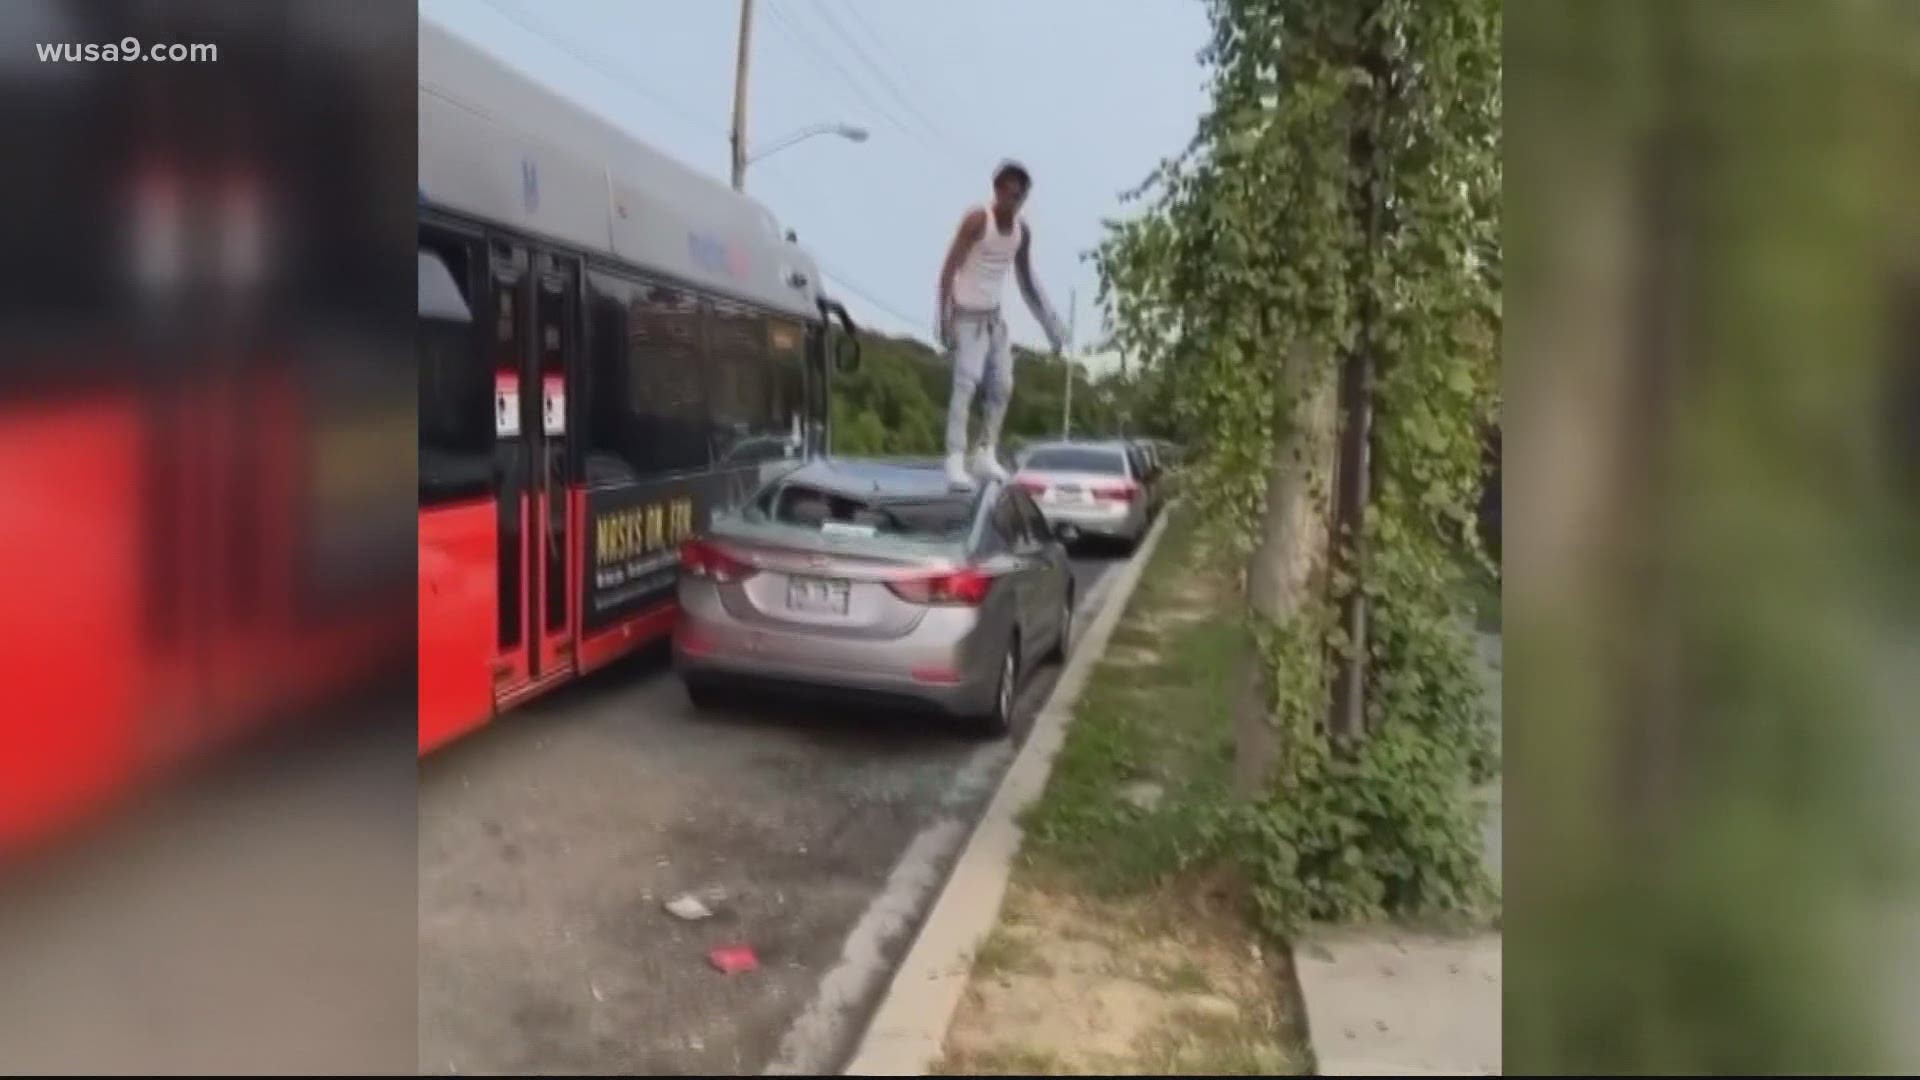 The viral video shows a man dancing on top of a Metro bus and jumping onto a parked car below, shattering the back windshield.